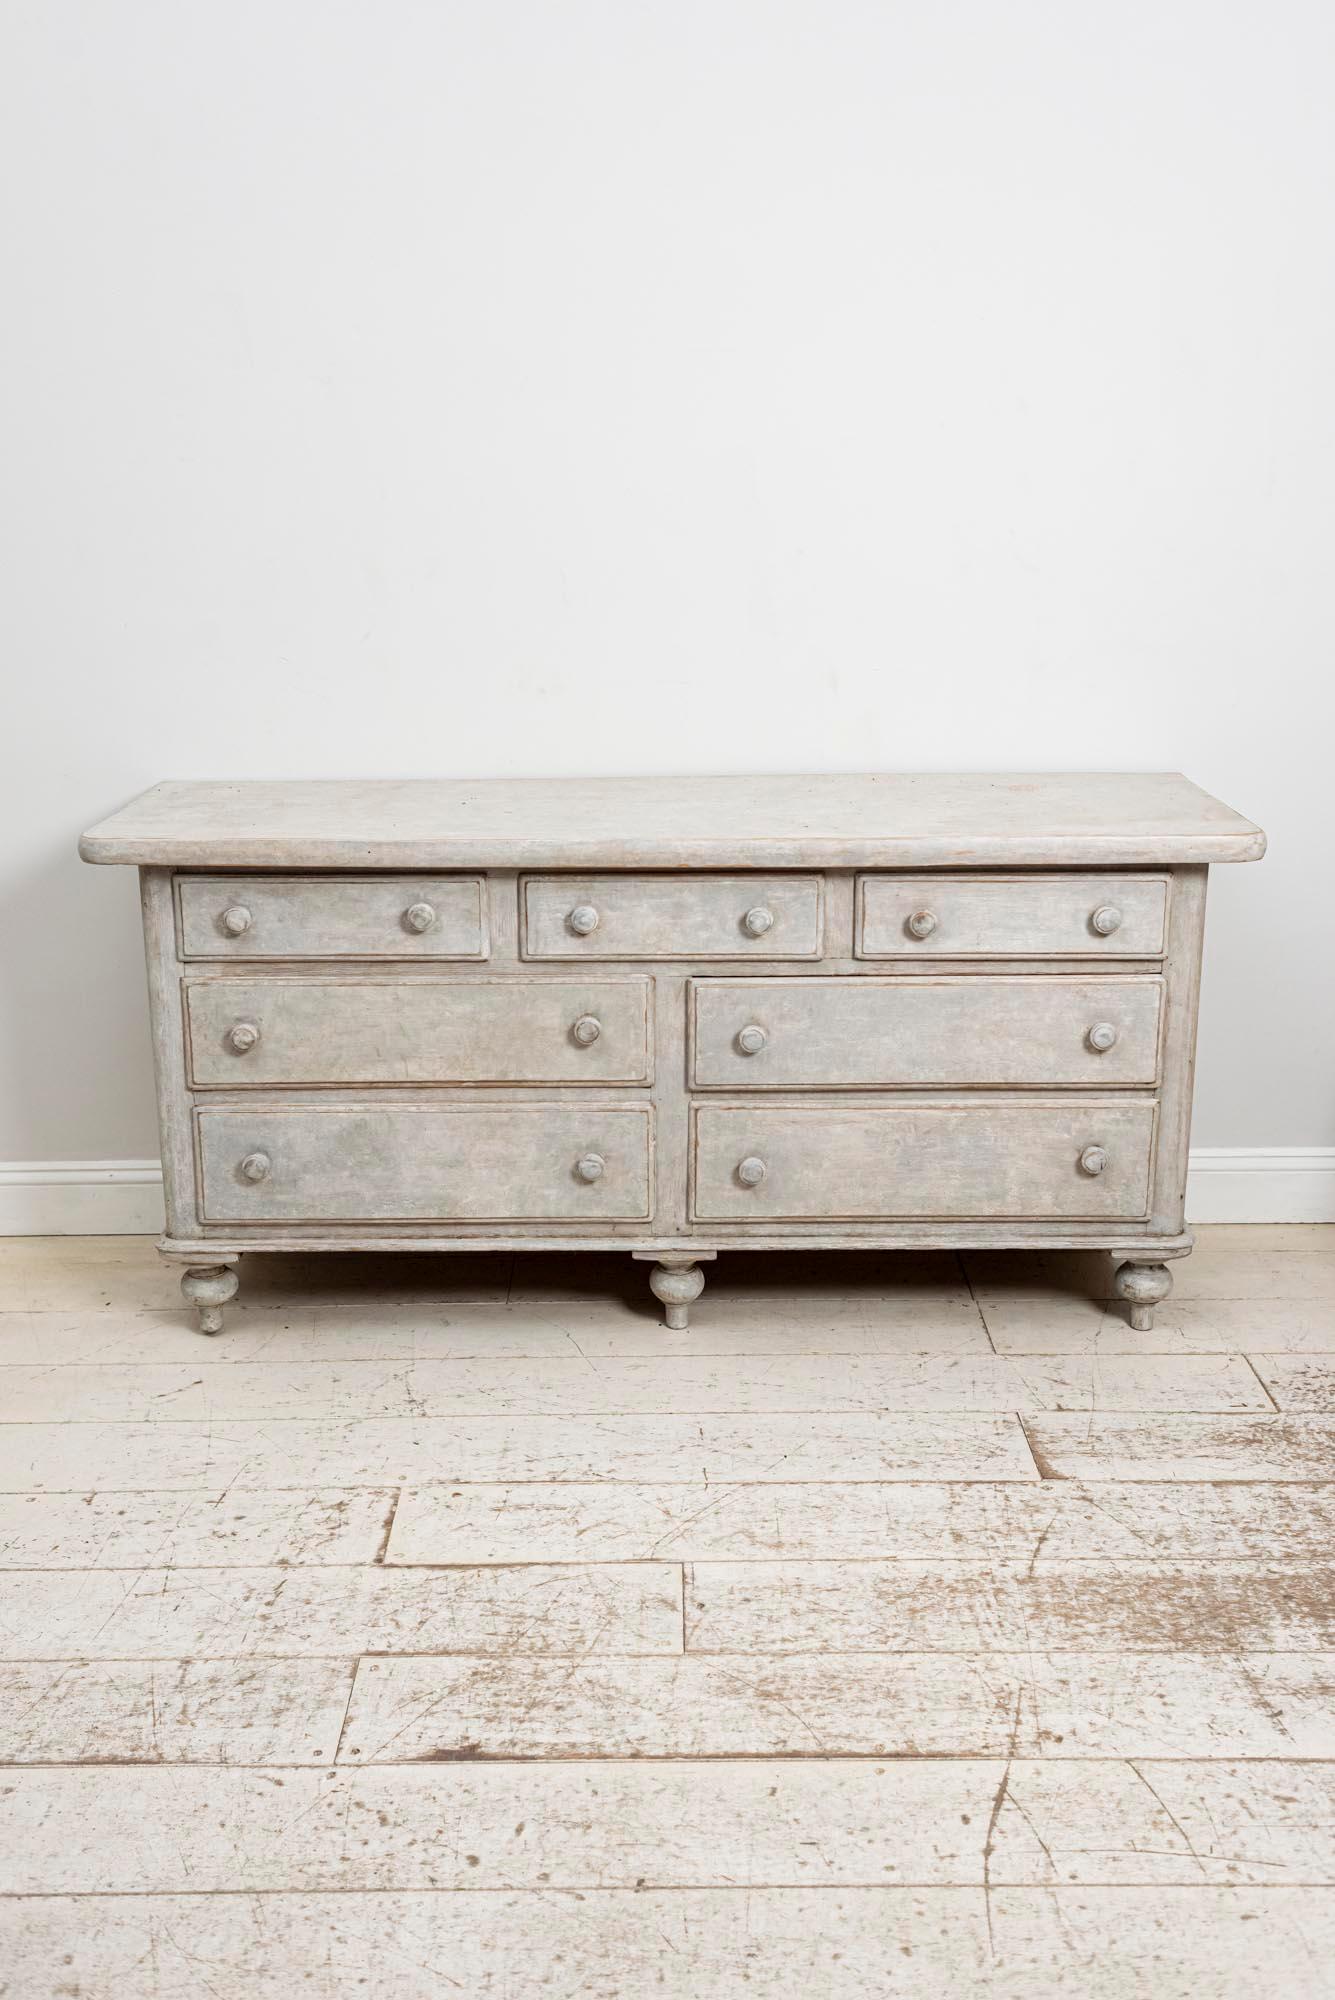 Country 19th Century English Painted Chest of Drawers